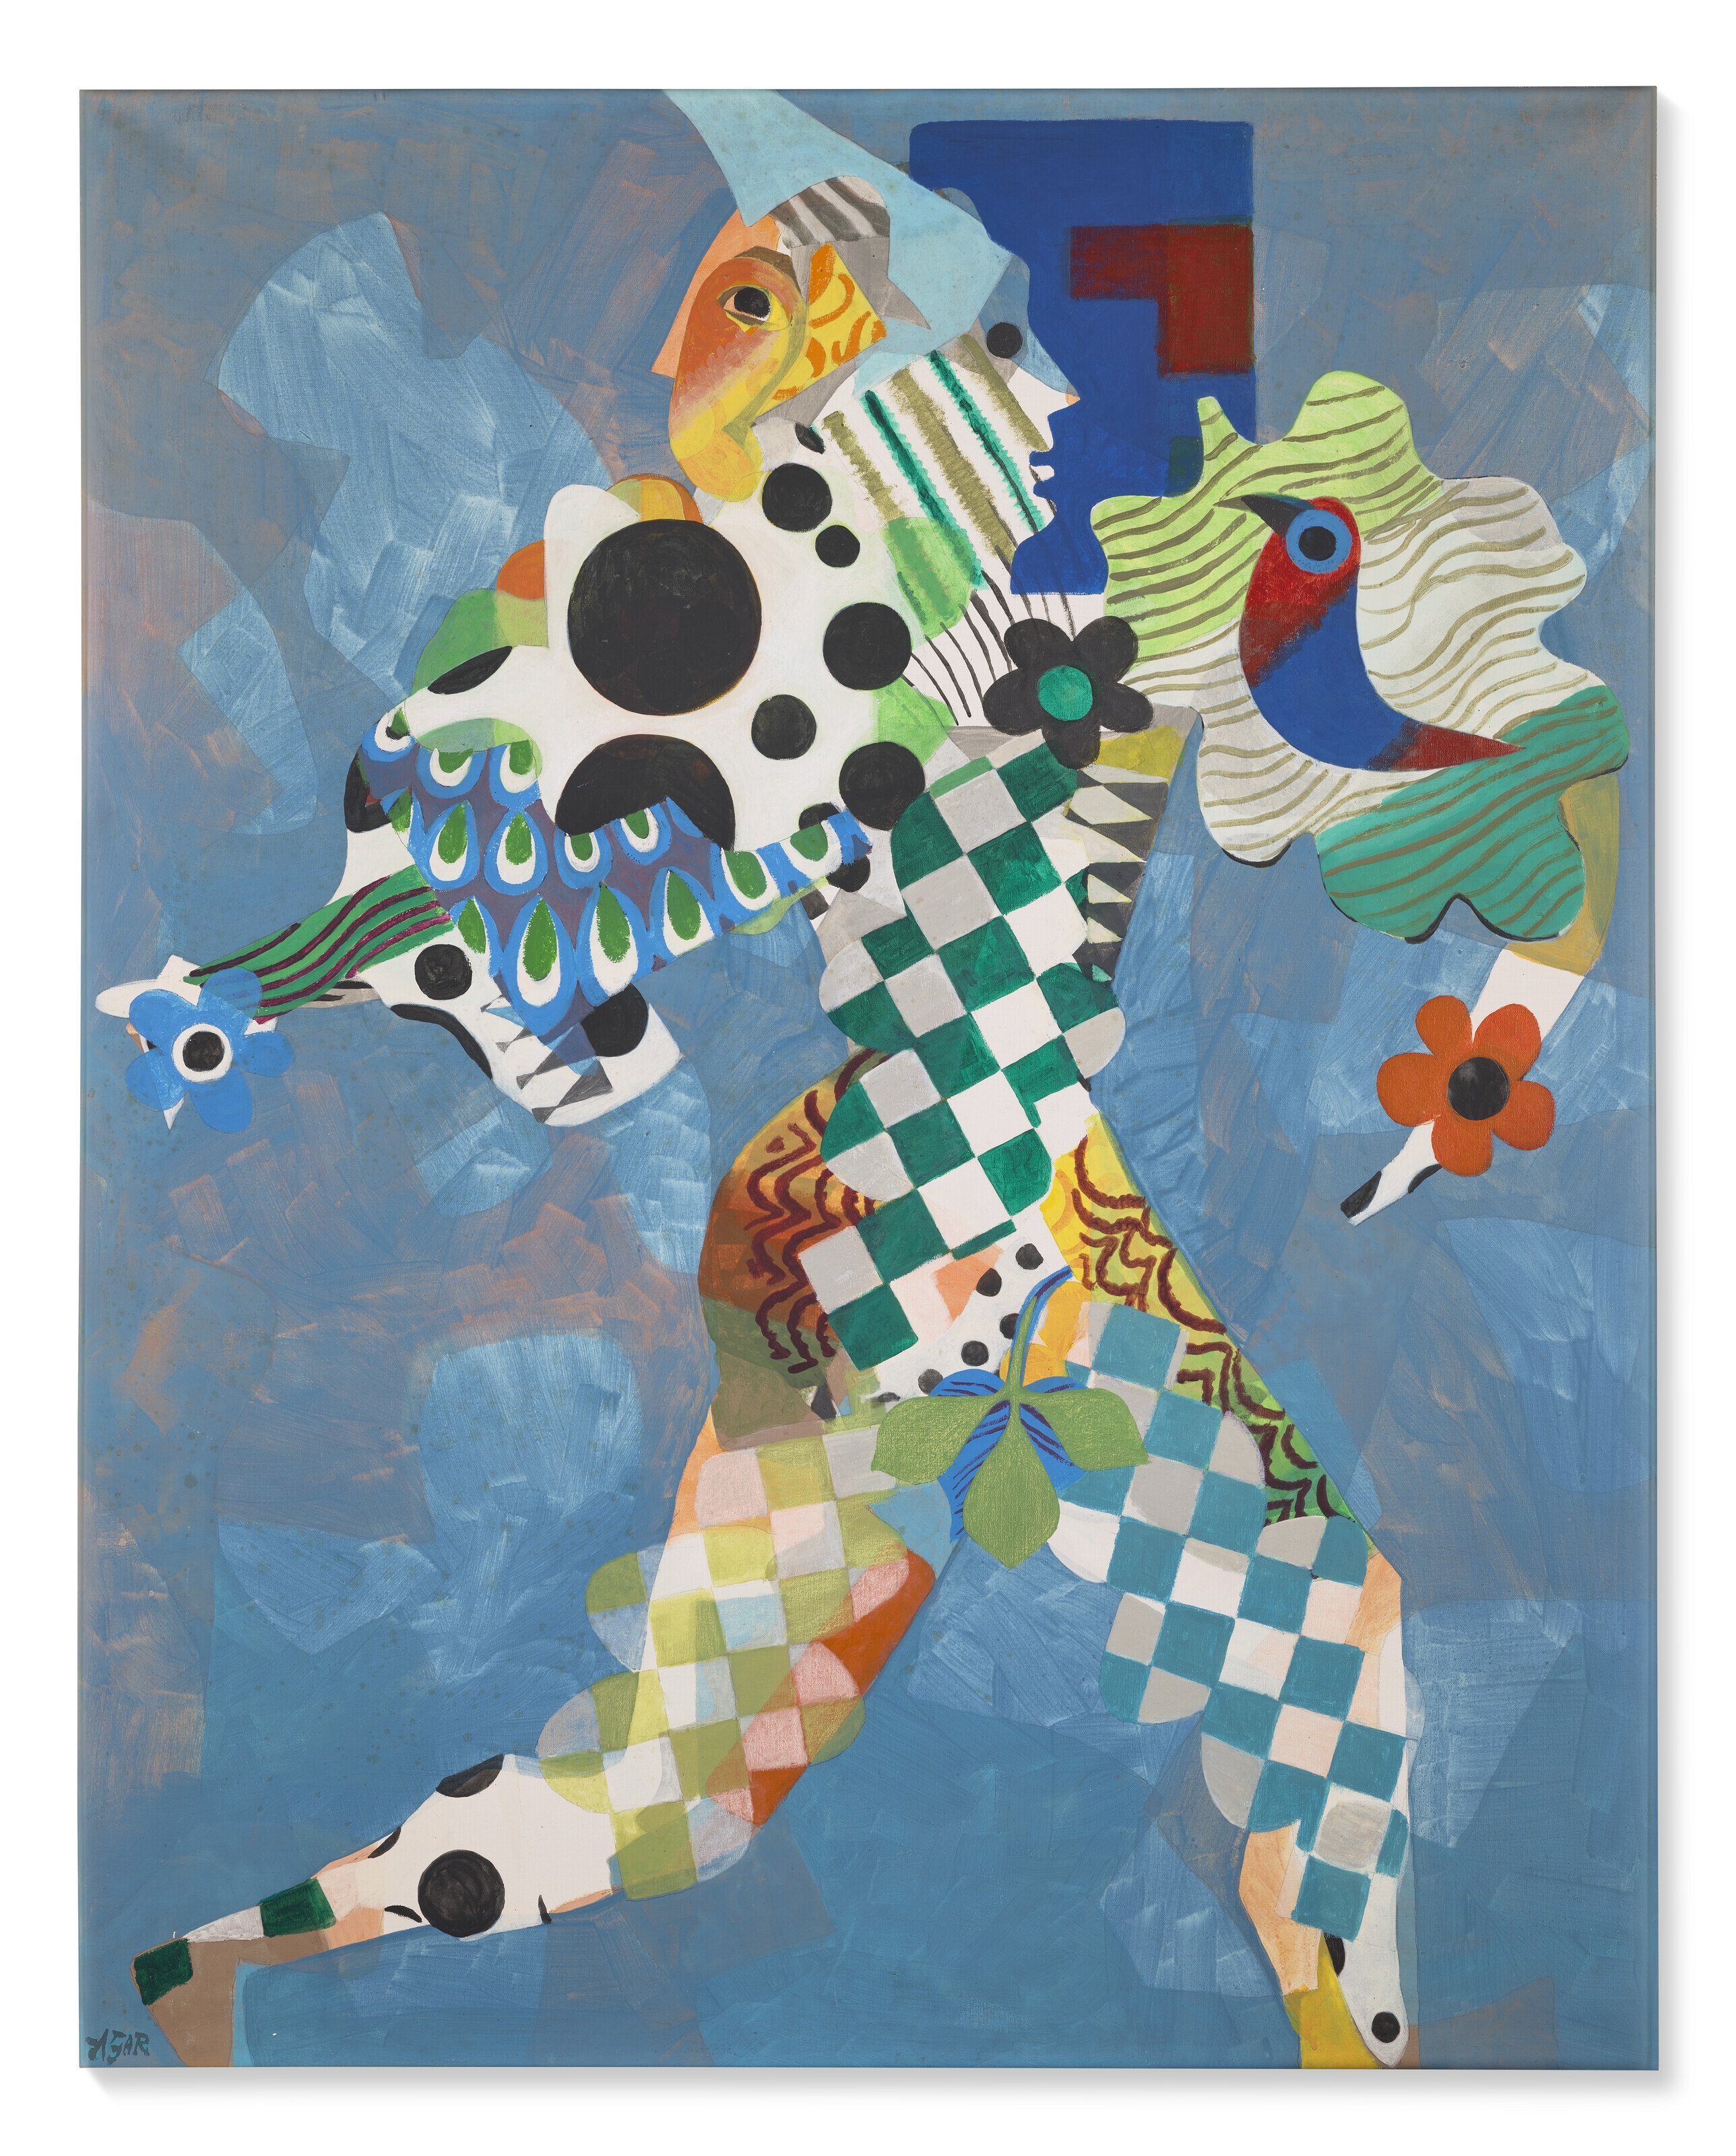 Artwork by Eileen Agar, Harlequin, Made of oil on canvas